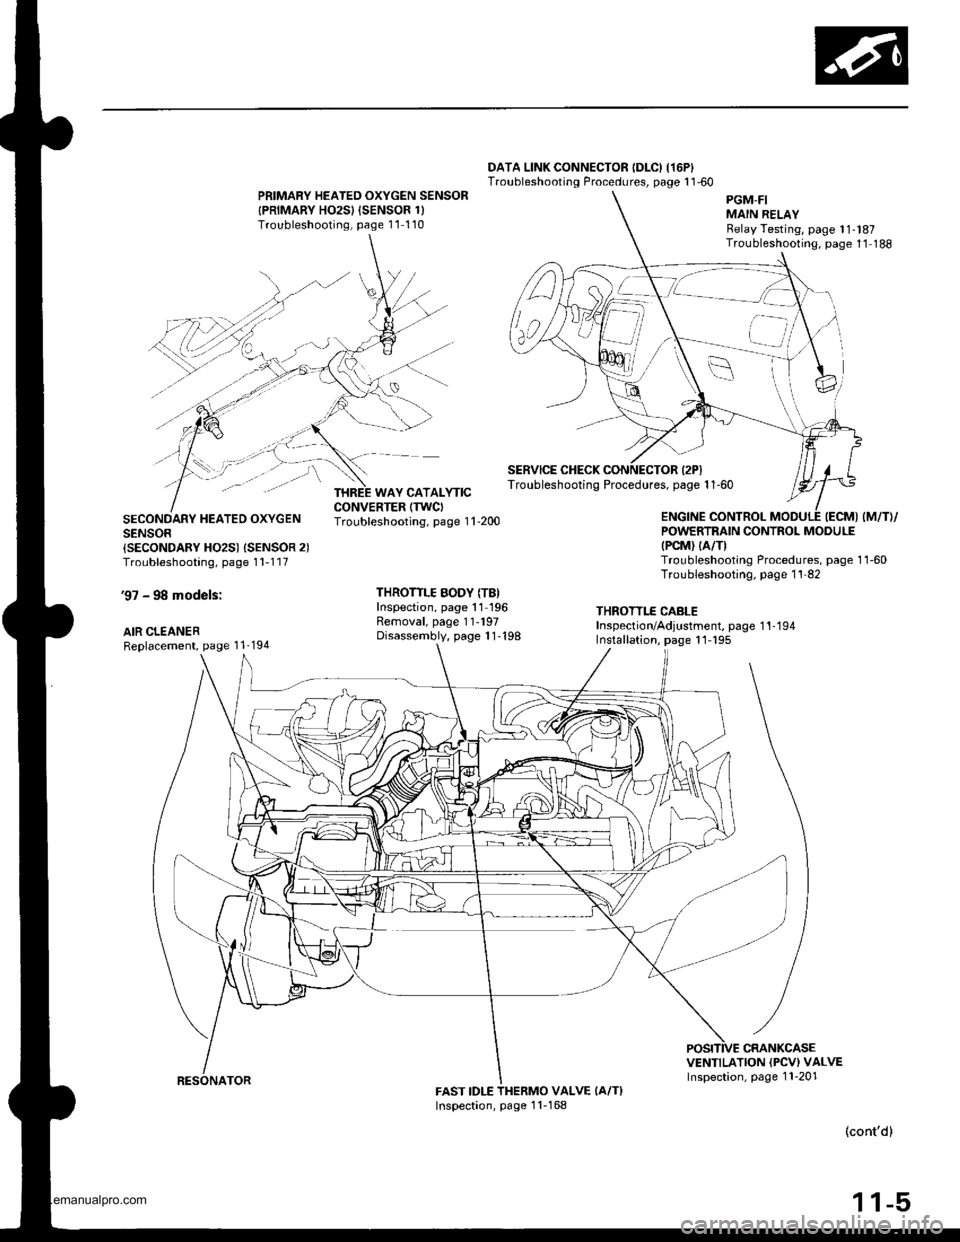 HONDA CR-V 1999 RD1-RD3 / 1.G Workshop Manual 
DATA LINK CONNECTOR {DLC) I16P}Troubleshooting Procedures, page 1 160PRIMARY HEATED OXYGEN SENSOR
{PRIMARY HO2SI {SENSOR 1)Troubleshooling, page 11 110
SECONDARY HEATED OXYGENSENSOR{SECONDARY HO2S) 